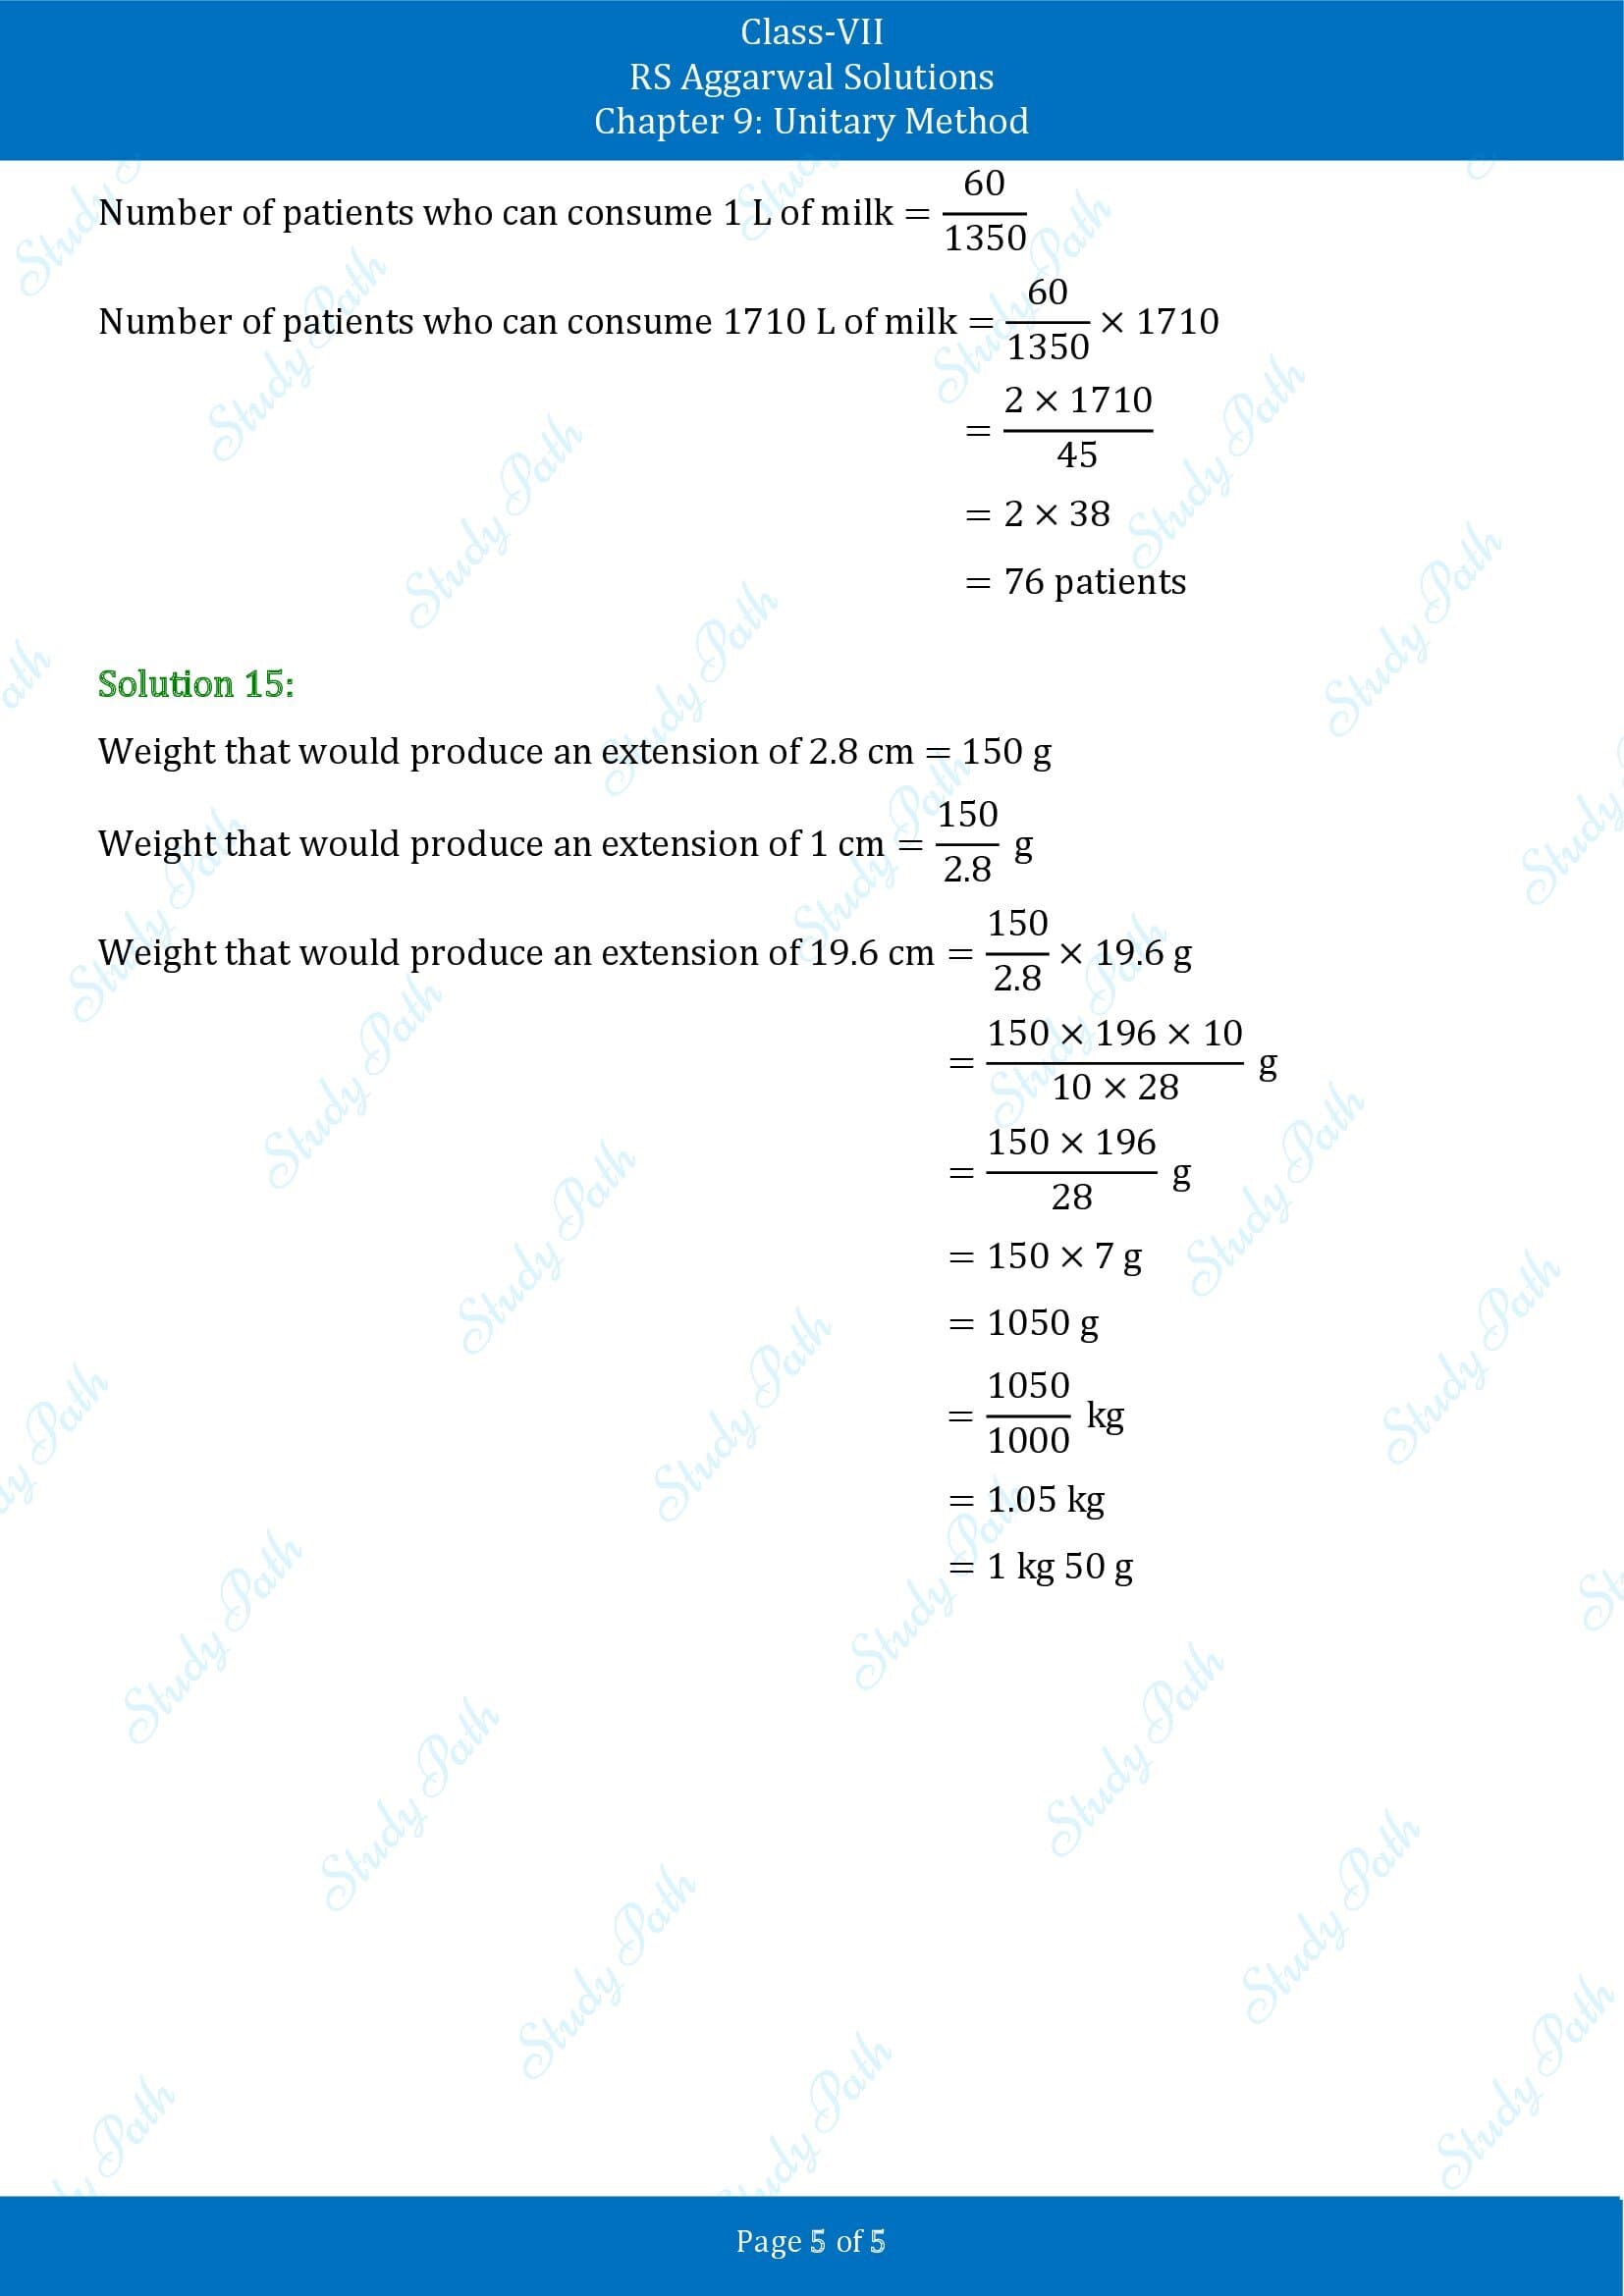 RS Aggarwal Solutions Class 7 Chapter 9 Unitary Method Exercise 9A 00005